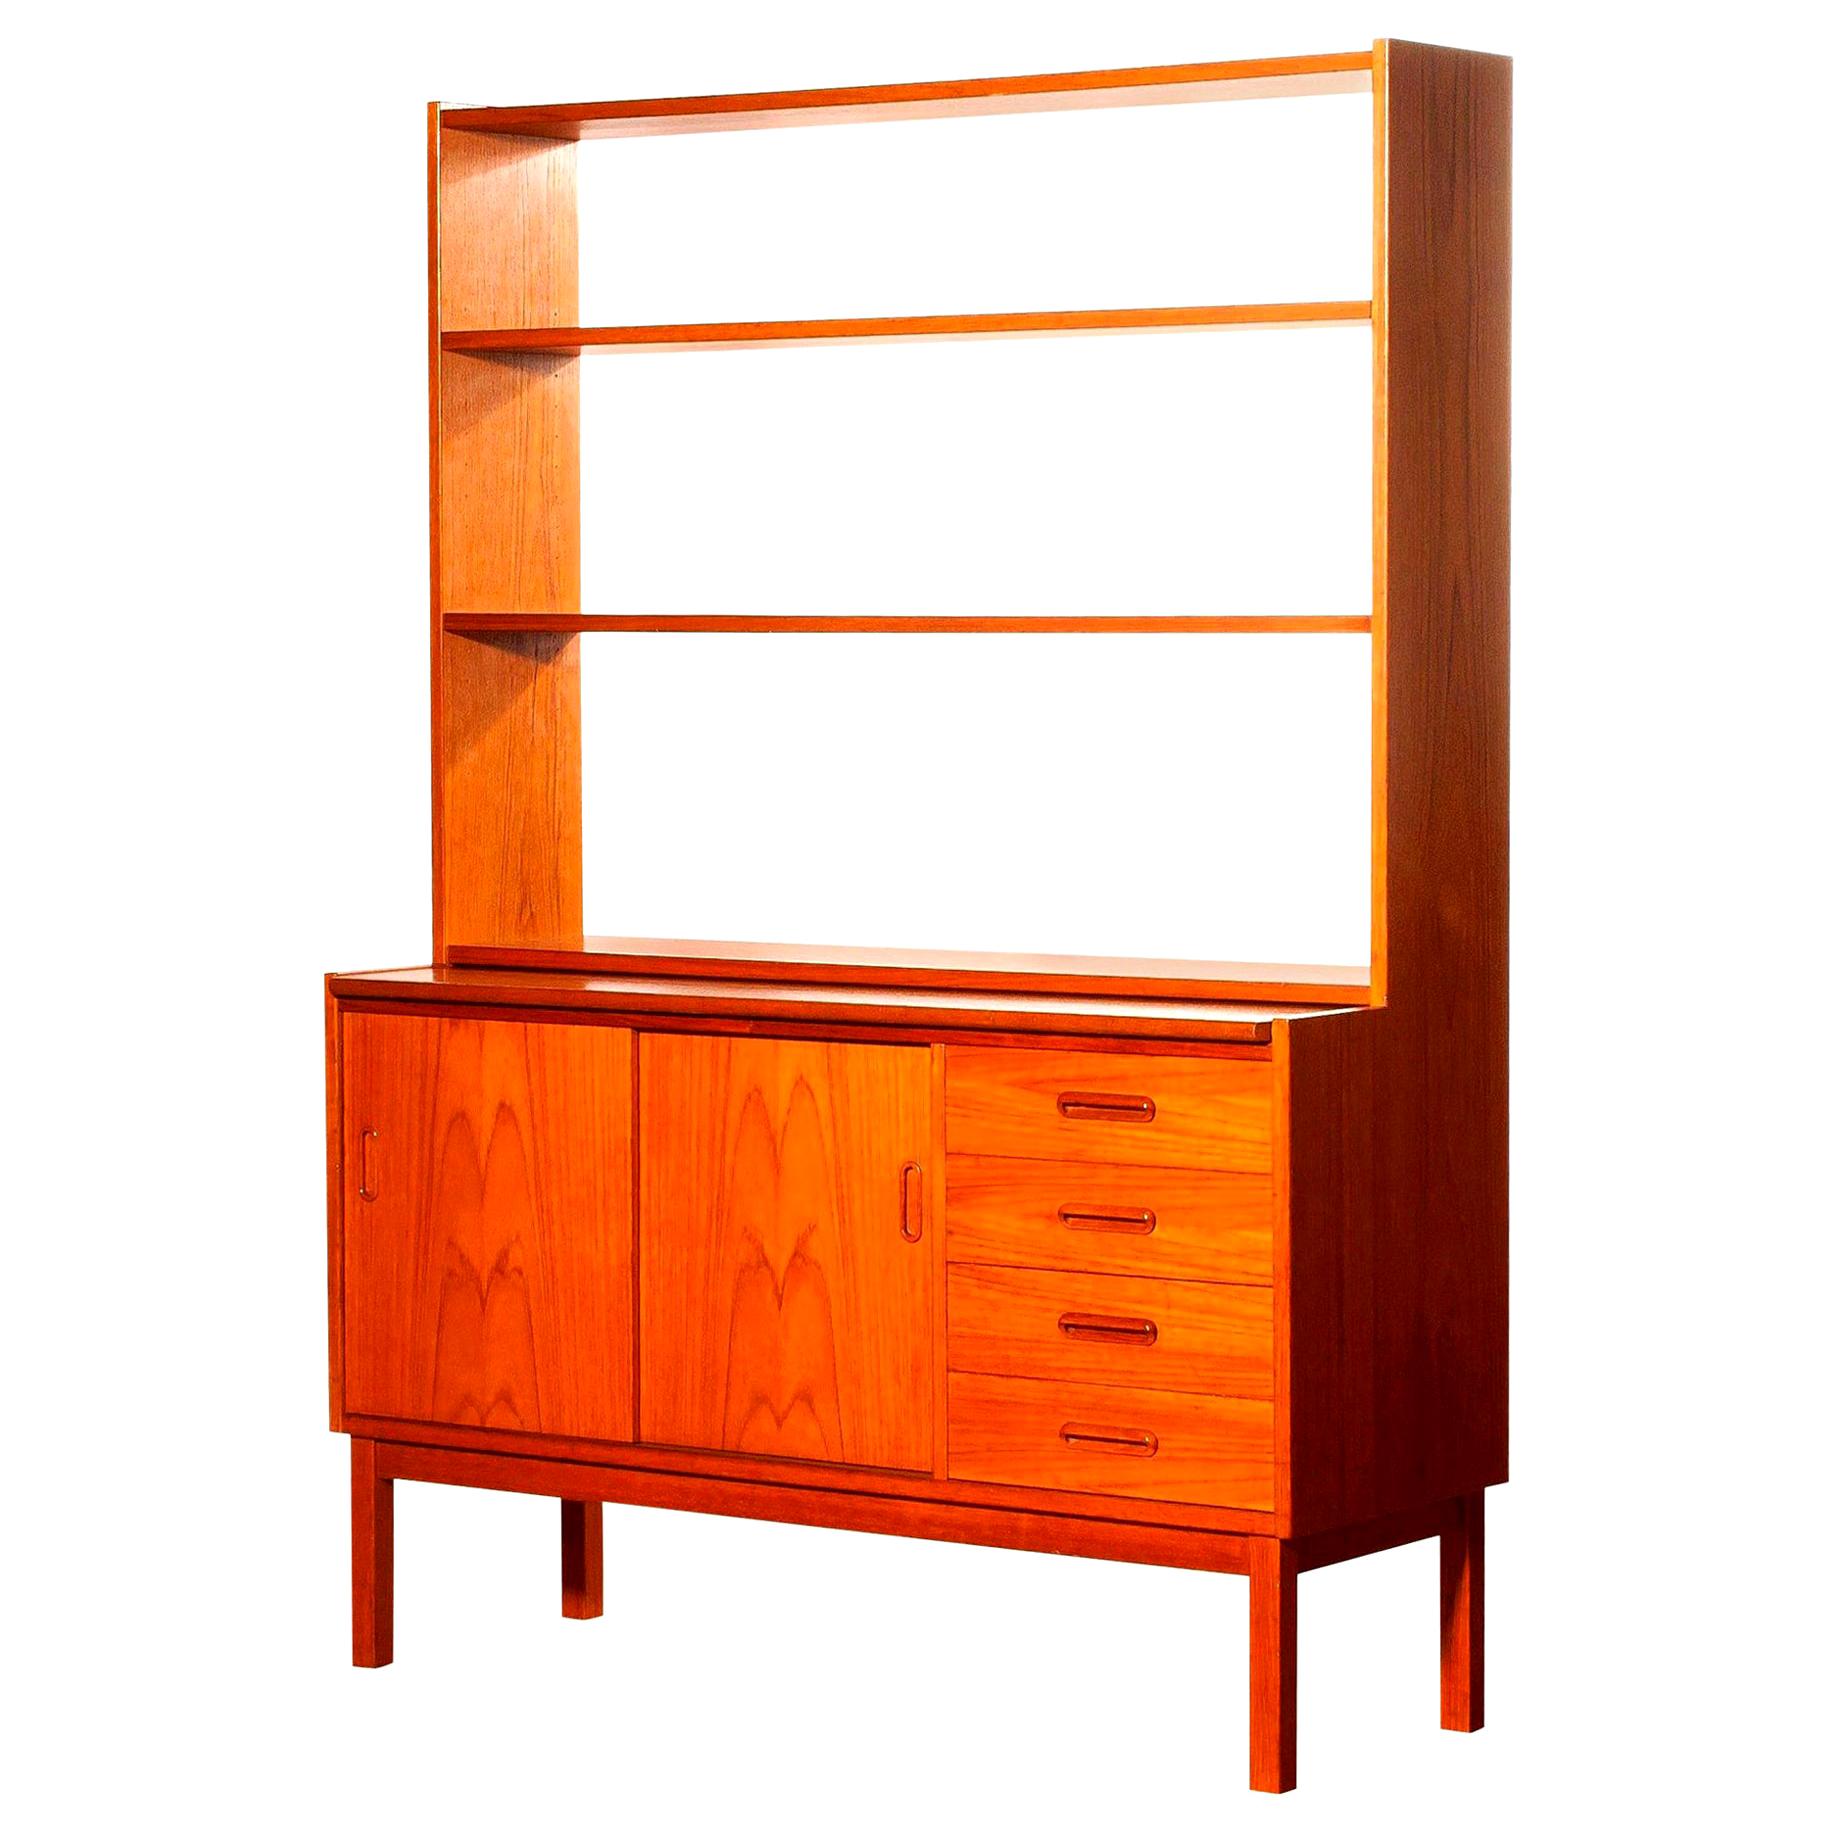 Swedish 1960s, Teak Bookcase with Slid Able Writing or Working Space from Sweden